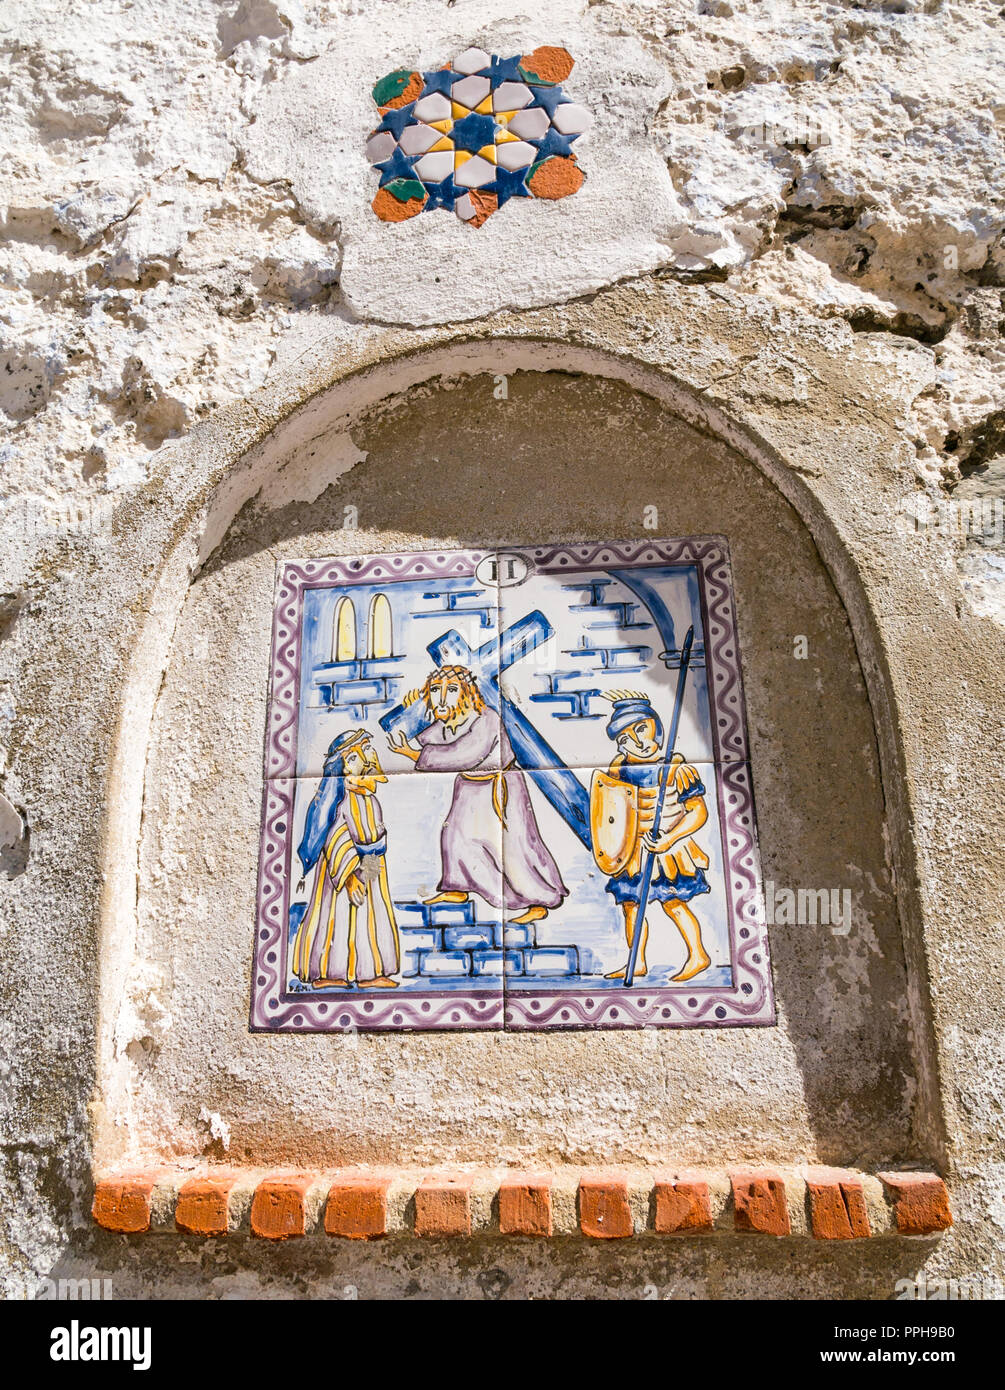 Colourful ceramic tiles on wall depicting Catholic faith second station of the cross, Salares, Axarquia, Andalusia, Spain Stock Photo